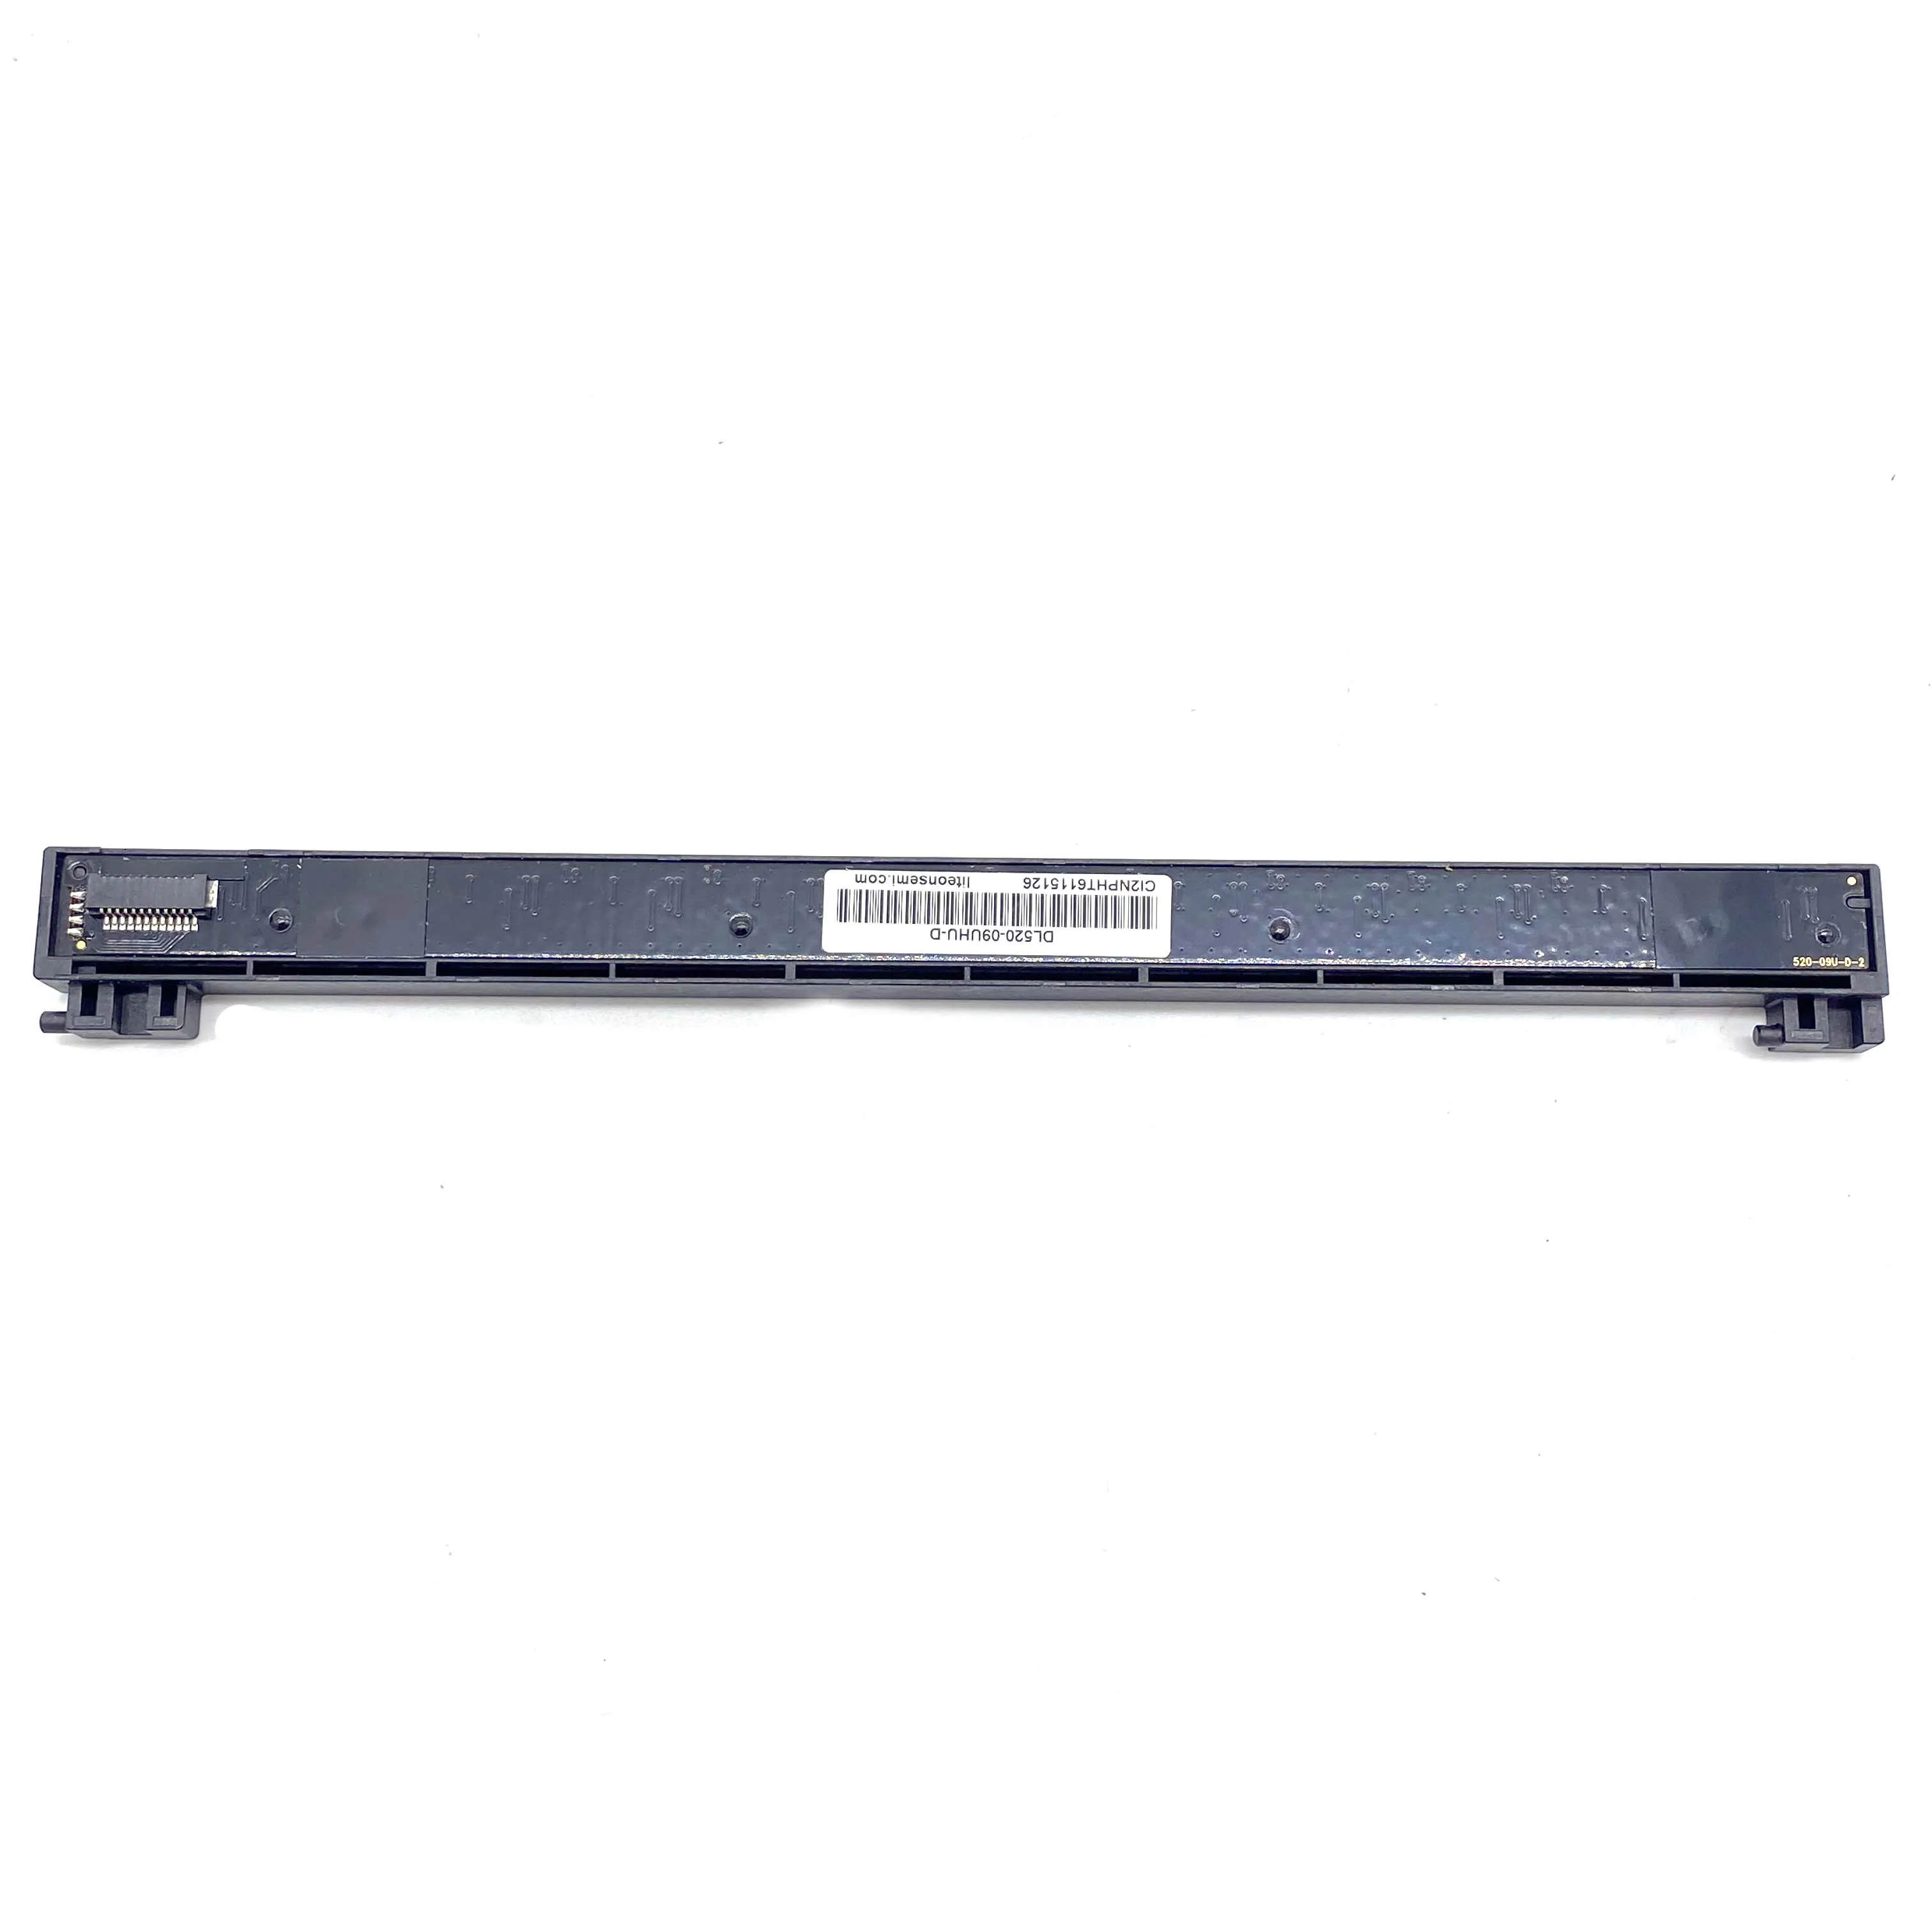 

Scanner head DCP-T425W DL520-09UHU-D fits for Brother T426W T420W T428W T520W T920DW T525W T435W T430W T820W DCP-T725DW T280W